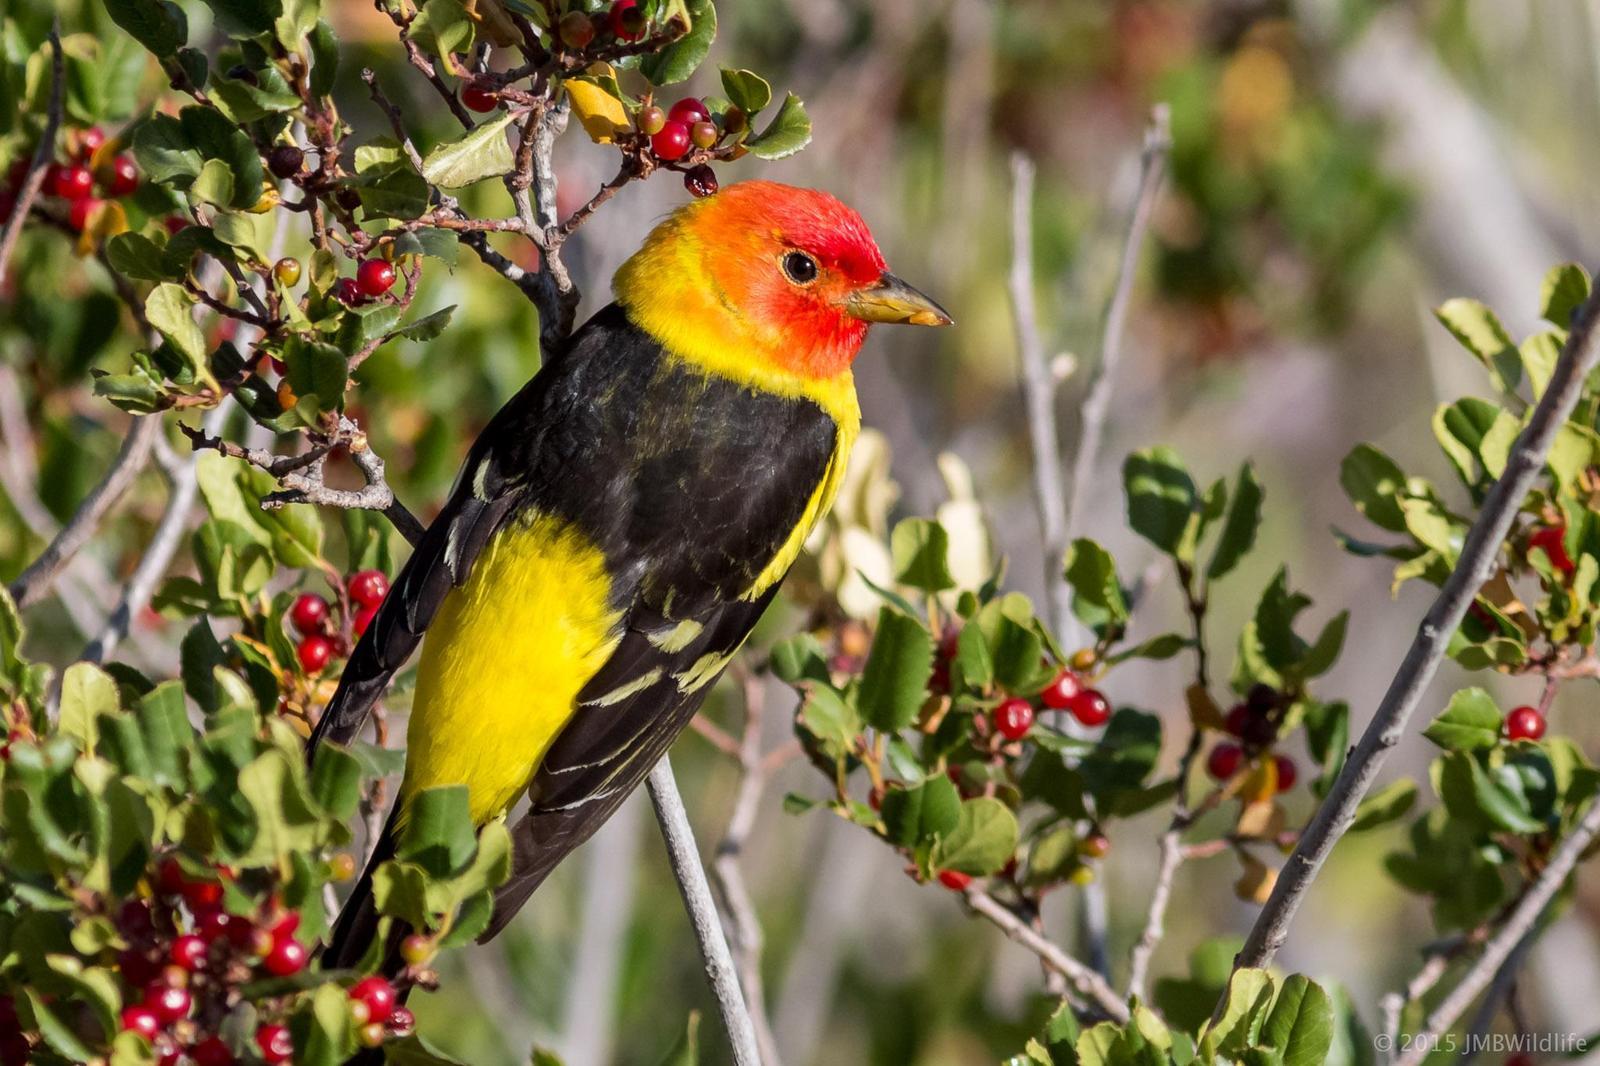 Western Tanager Photo by Jeff Bray